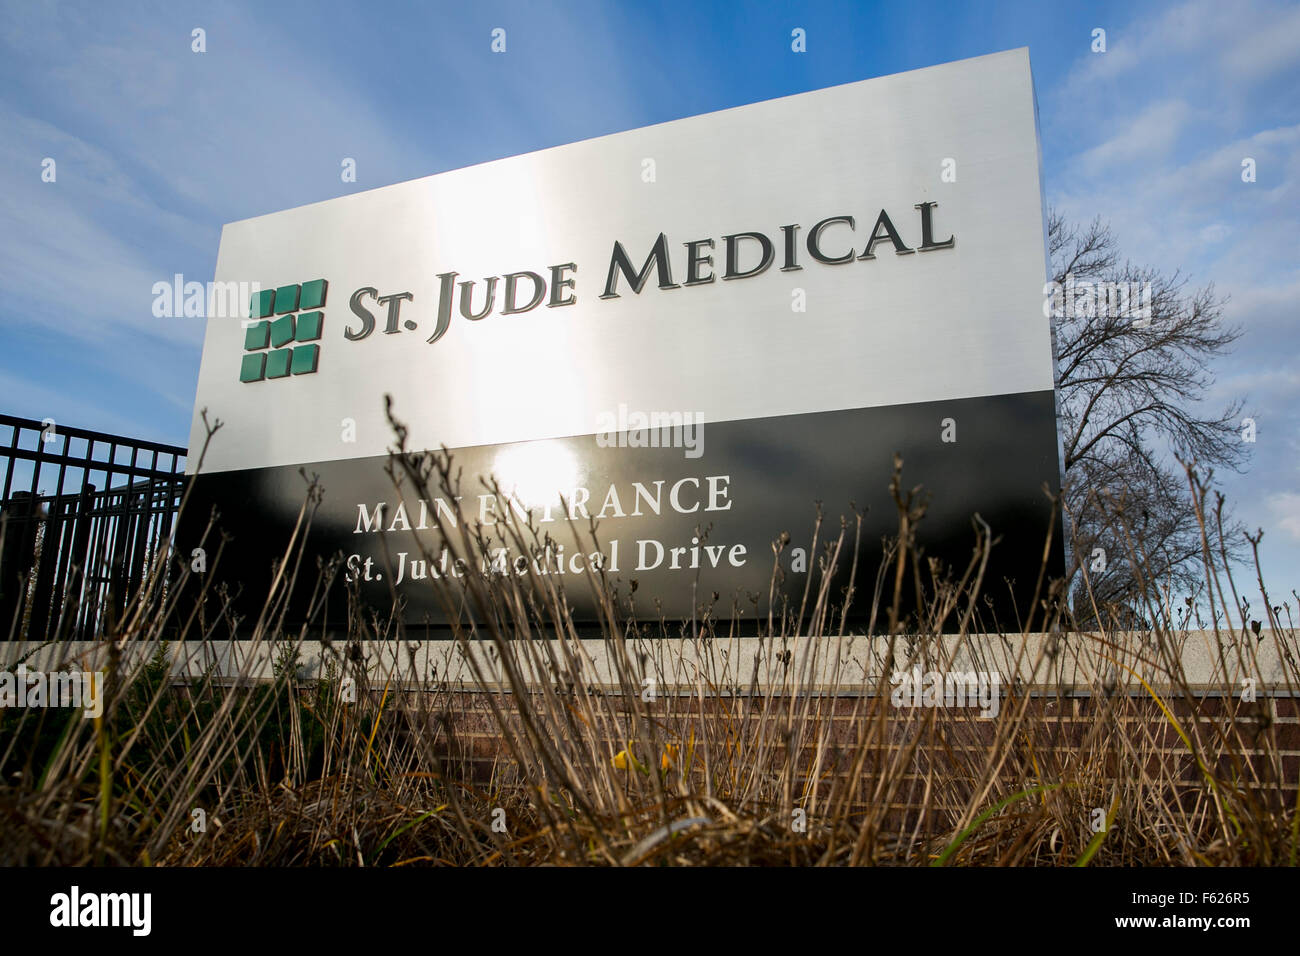 A logo sign outside of the headquarters of St. Jude Medical, Inc., in St. Paul, Minnesota on October 25, 2015. Stock Photo